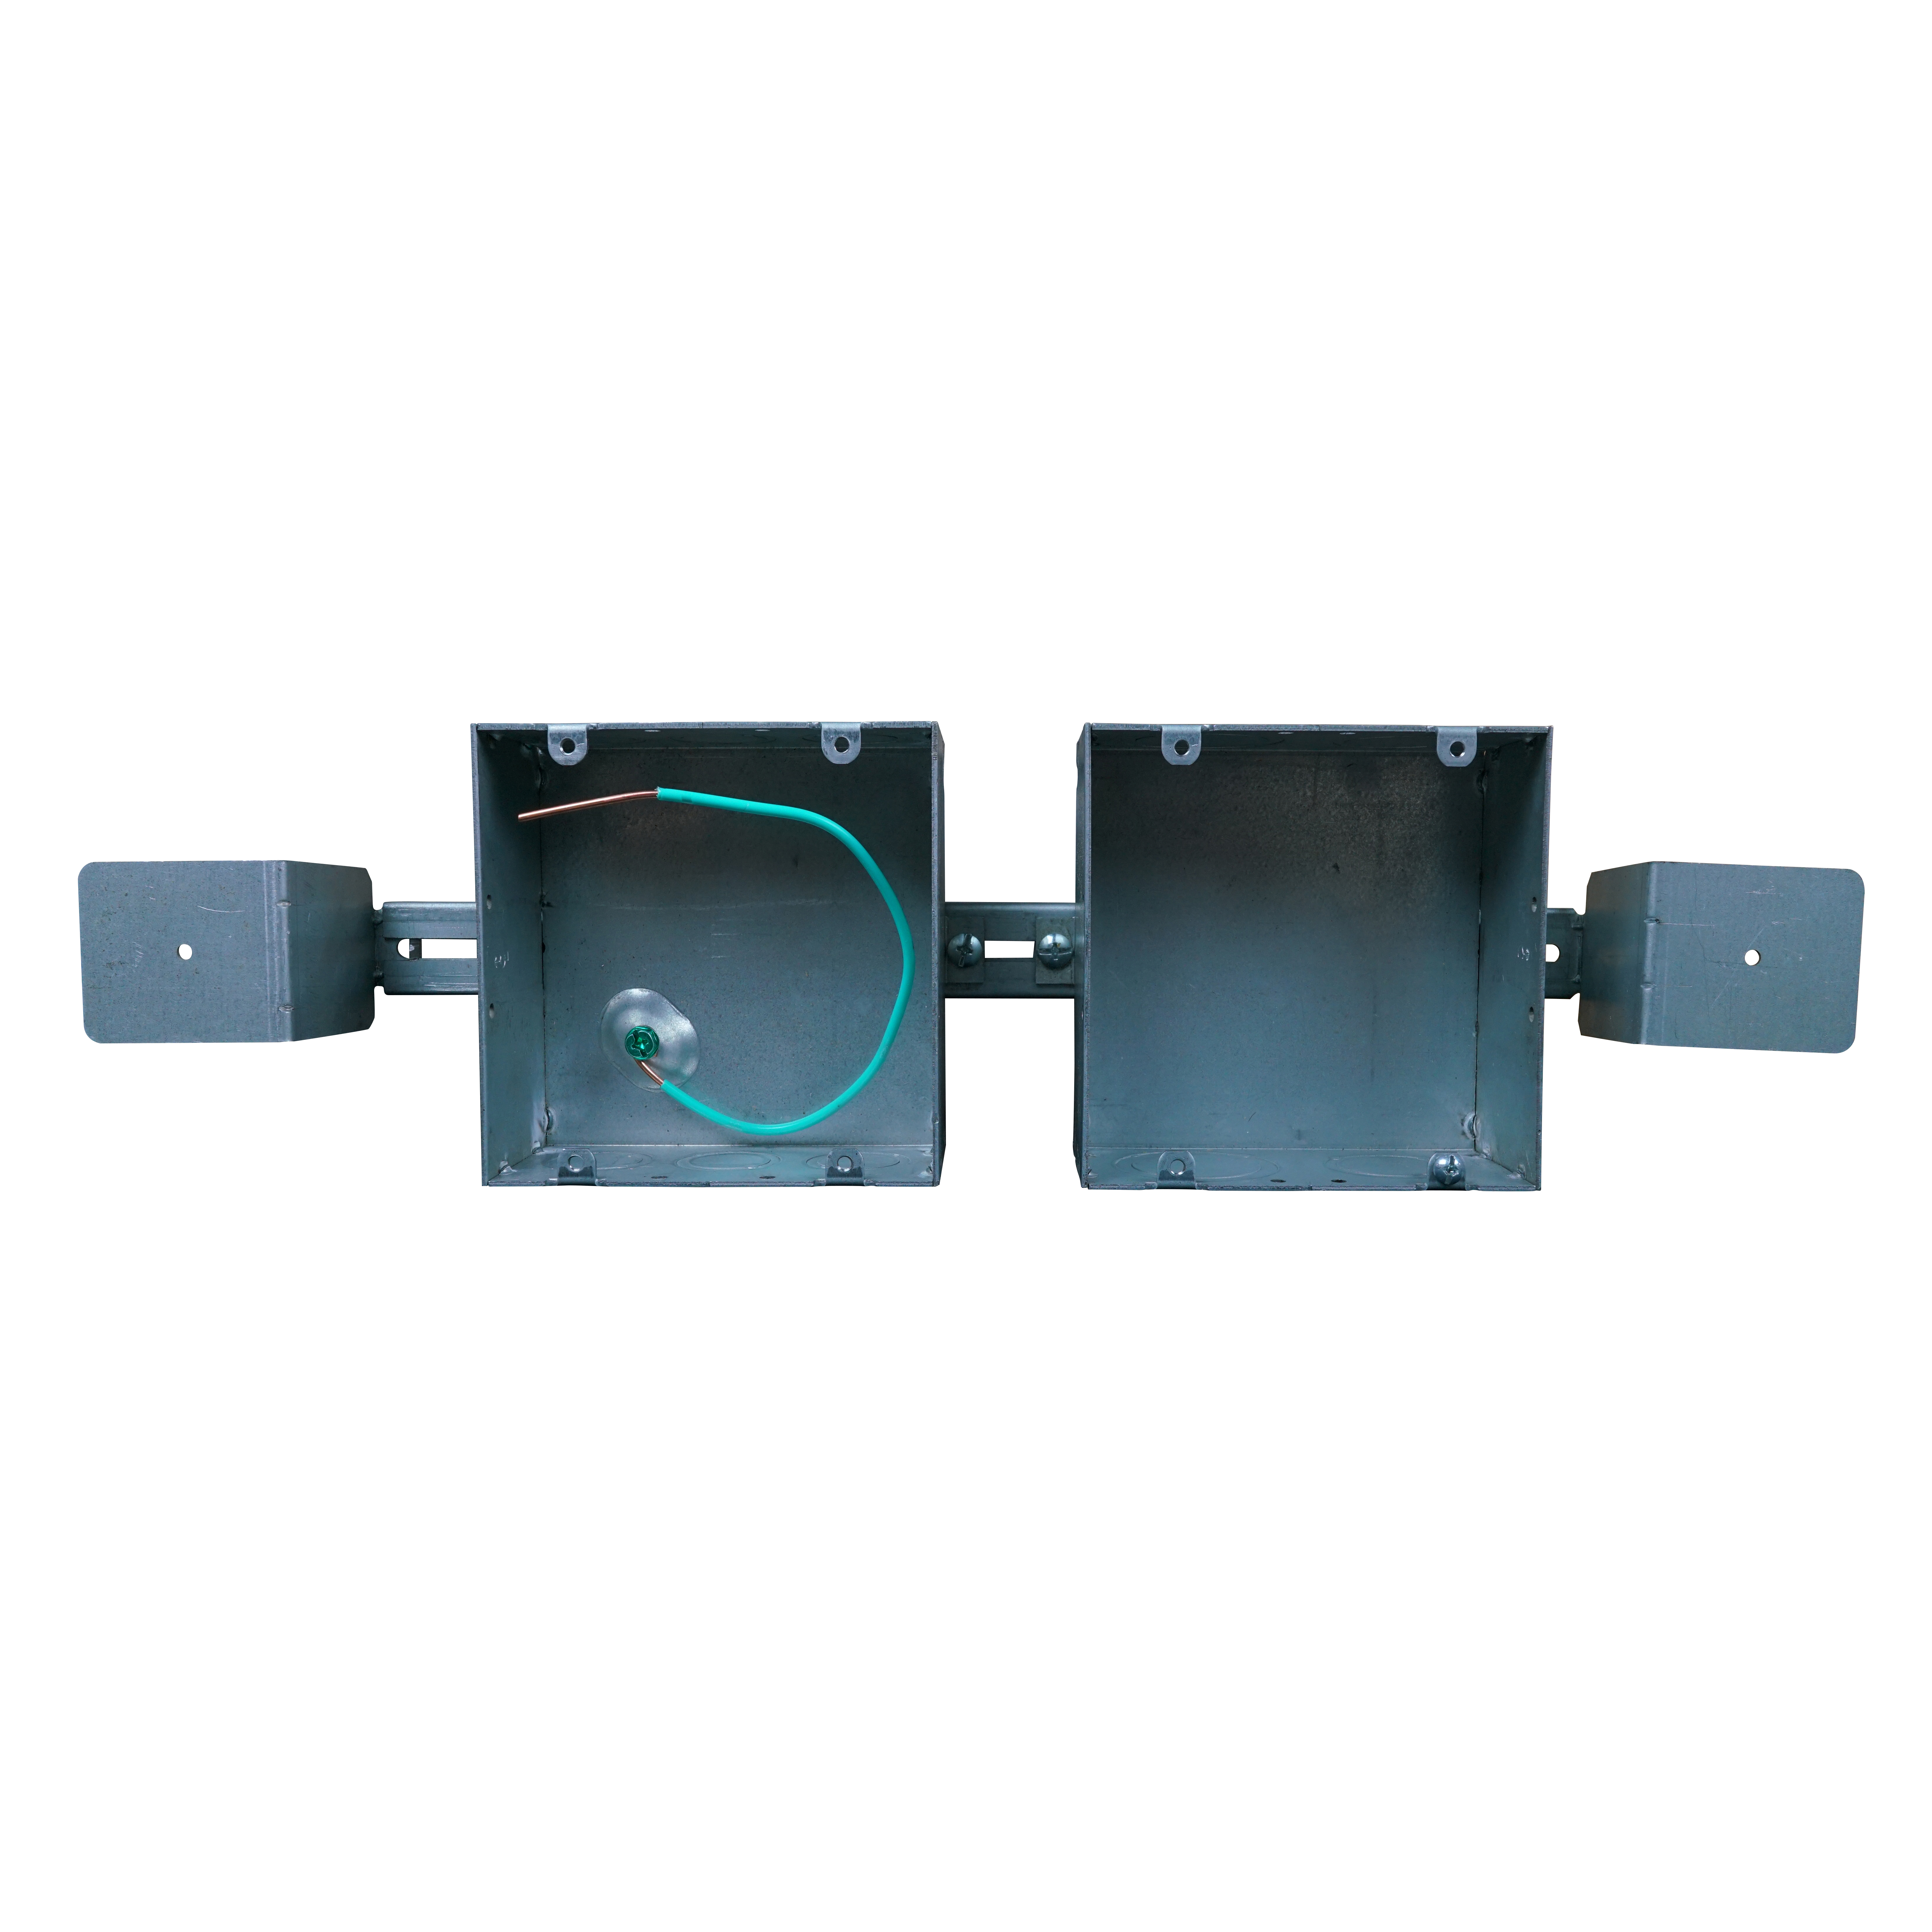 Southwire SIMFab BAR bracket system allows the installer to easily position and adjust electrical